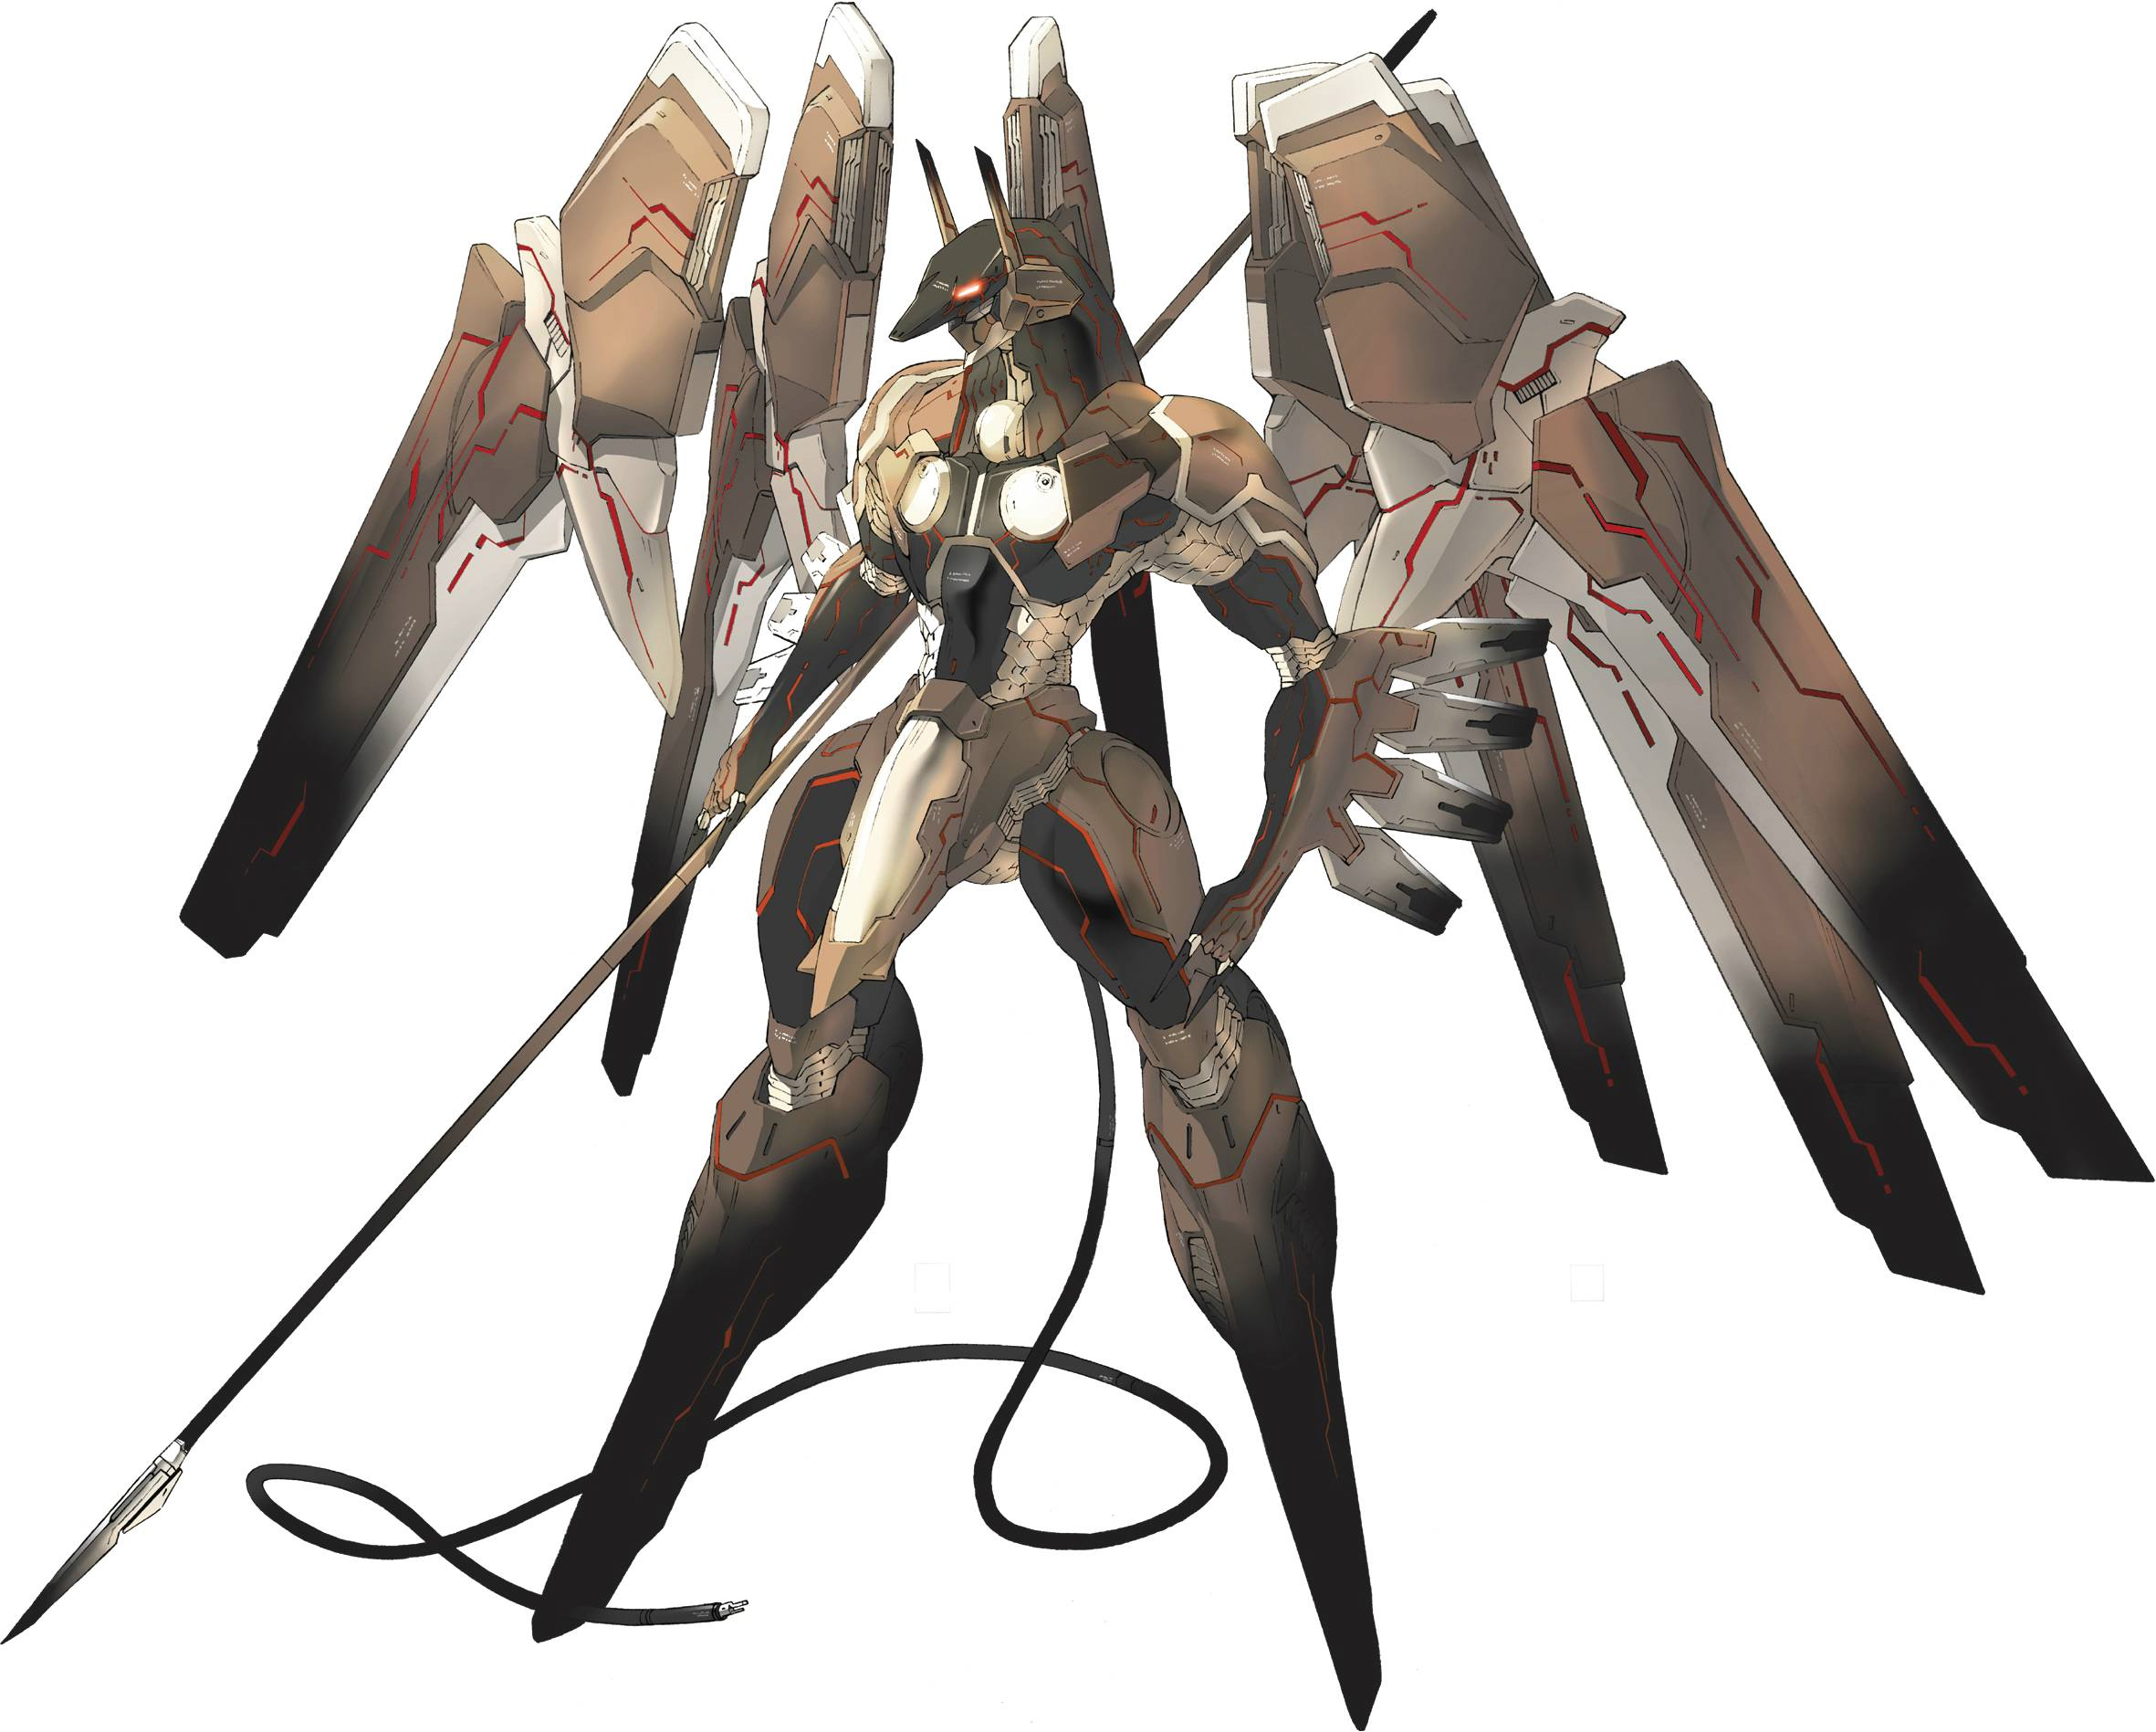 Zone Of The Enders Backgrounds, Compatible - PC, Mobile, Gadgets| 2362x1897 px